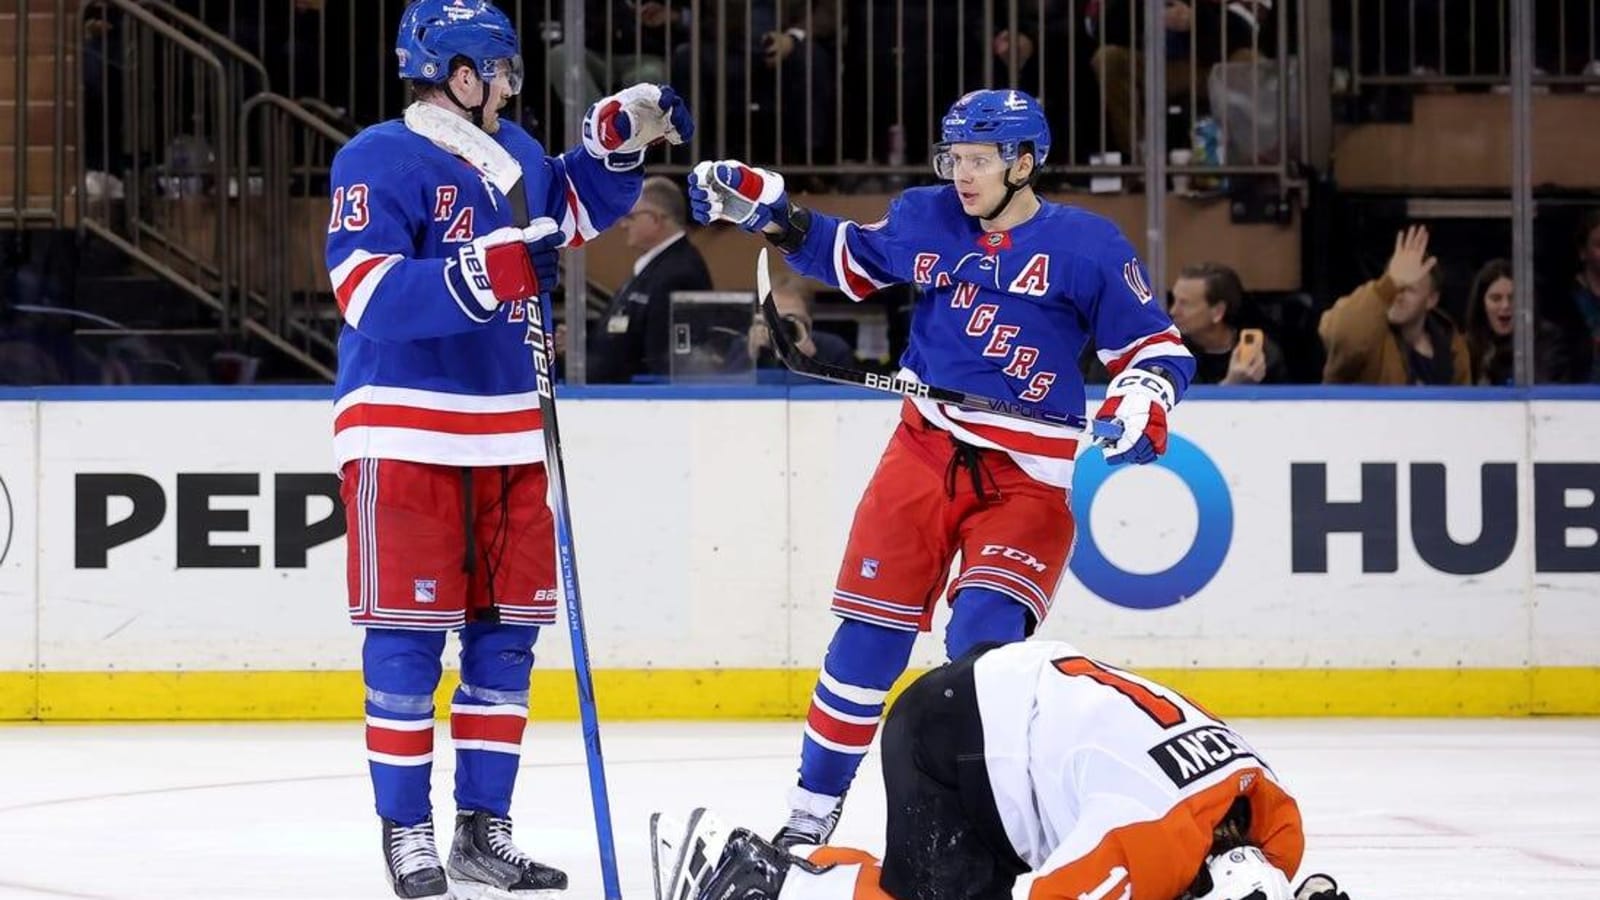 Rangers try to keep hold on division vs. slumping Flyers